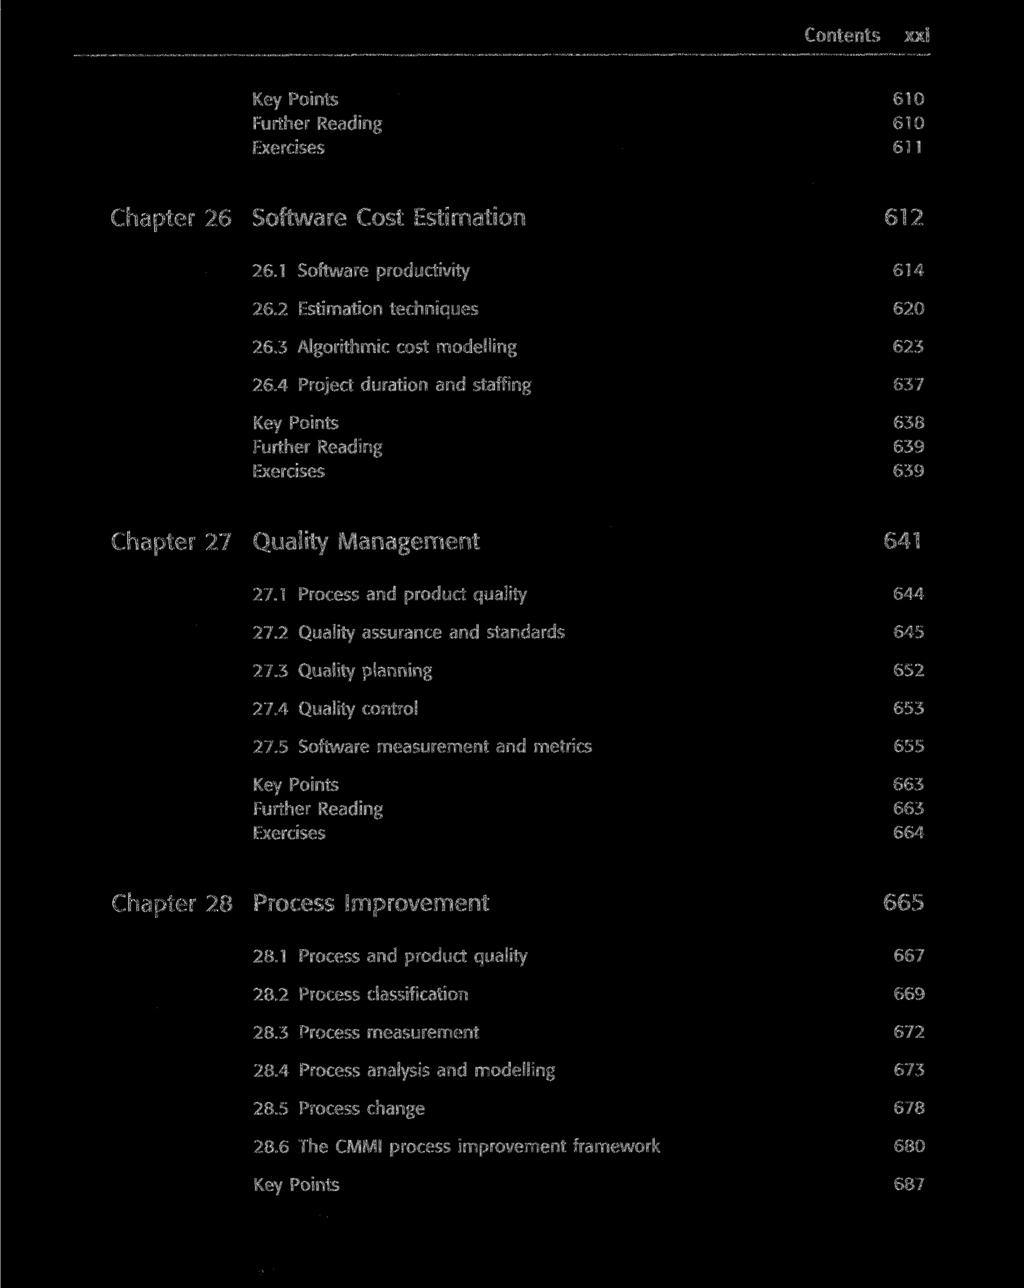 Contents xxi Key Points 610 Further Reading 610 Exercises 611 Chapter 26 Software Cost Estimation 612 26.1 Software productivity 614 26.2 Estimation techniques 620 26.